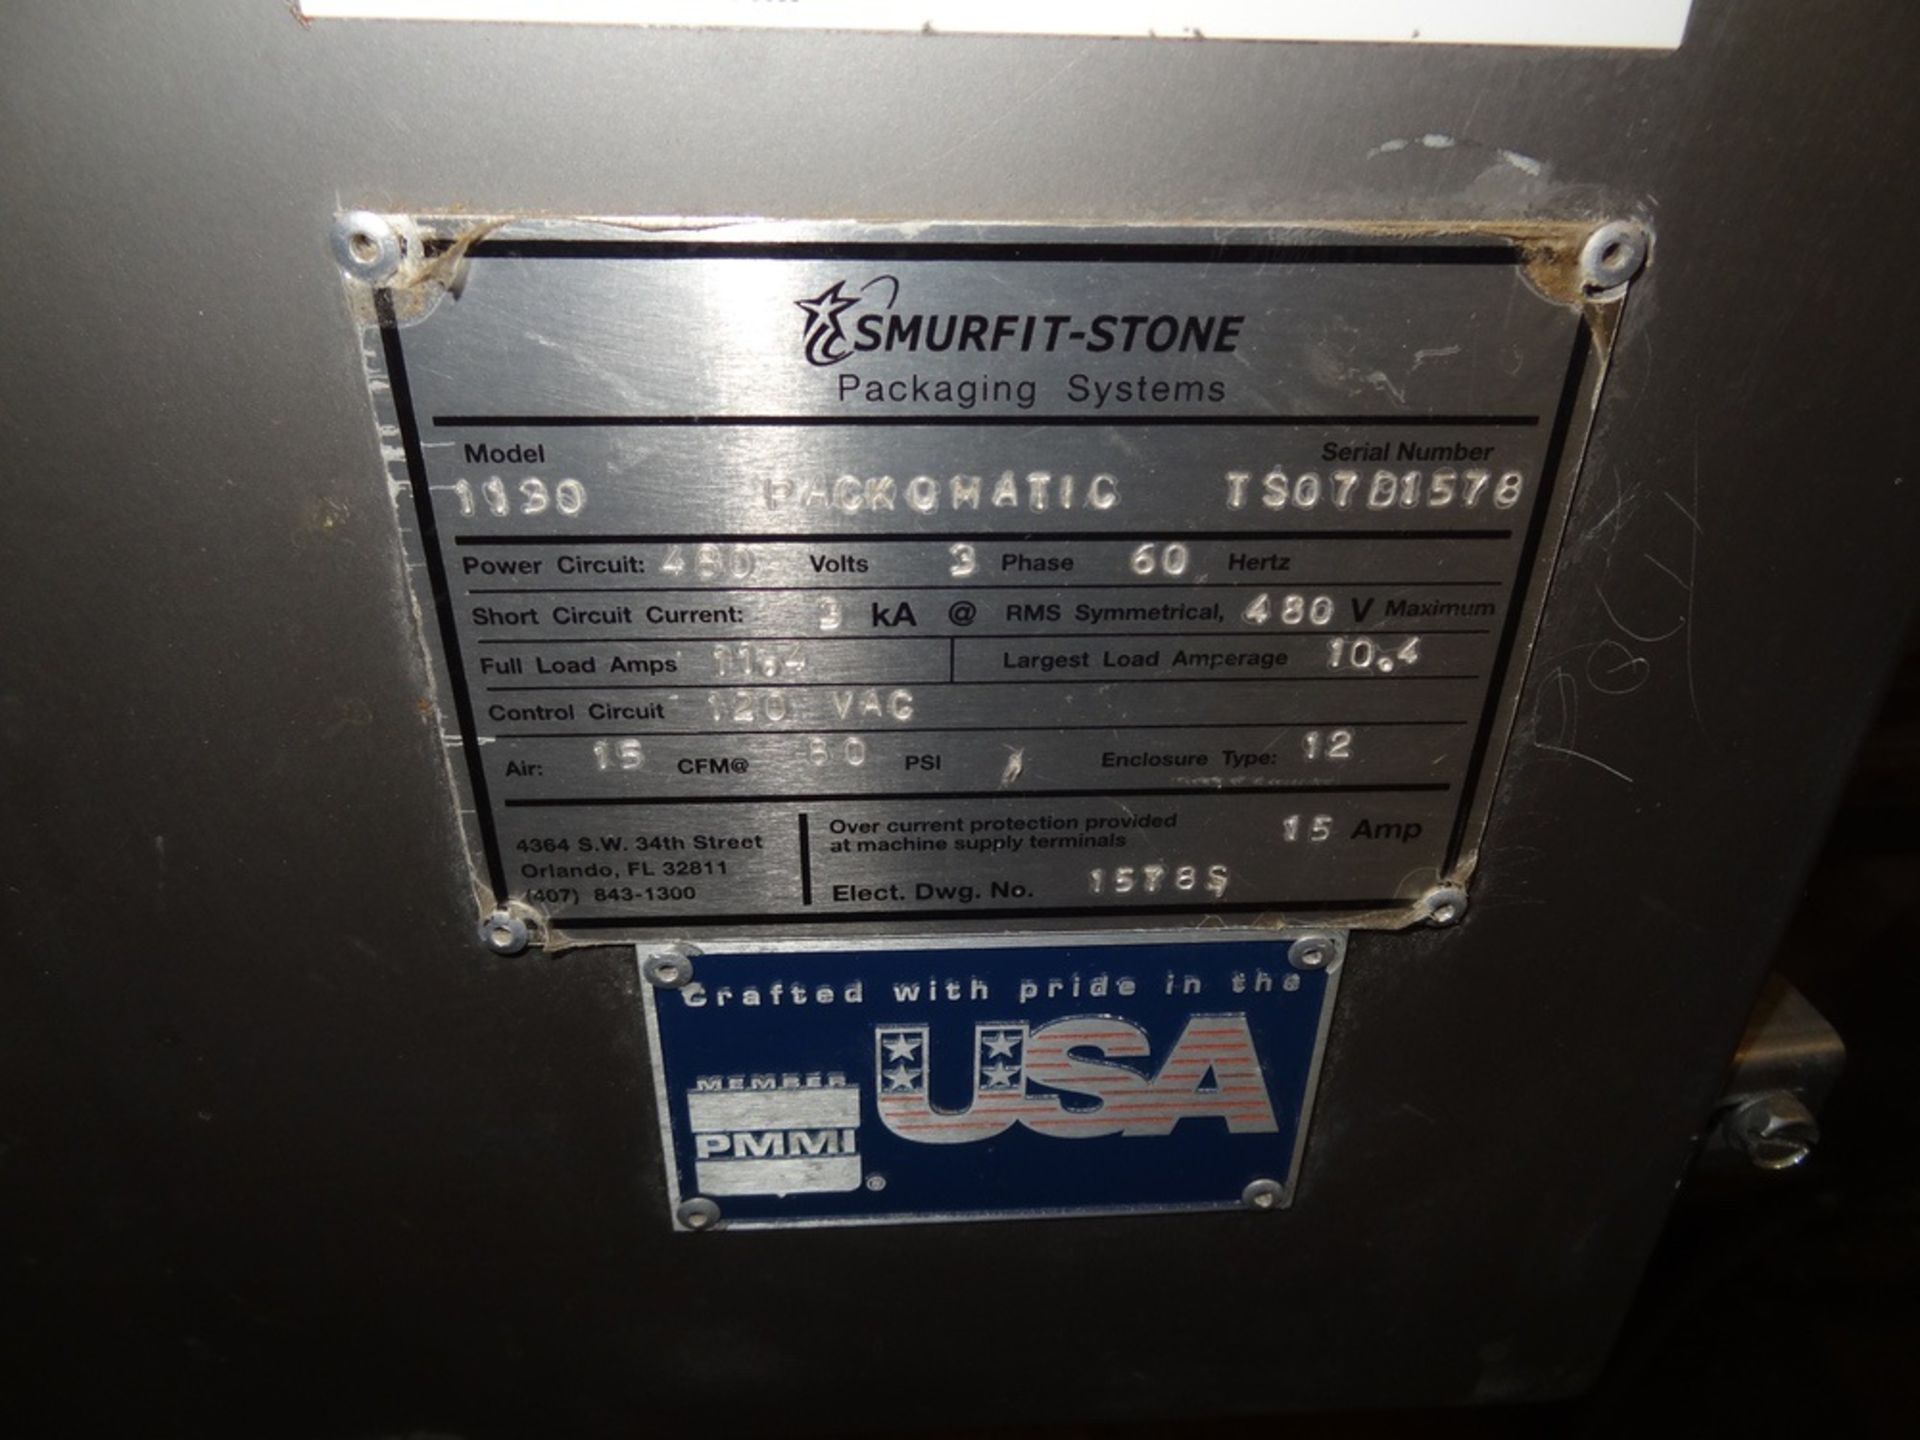 Smurfit-Stone Model 1130 Packomatic Automatic Case Sealer w/N | Rigging Fee: $850 - Image 2 of 4